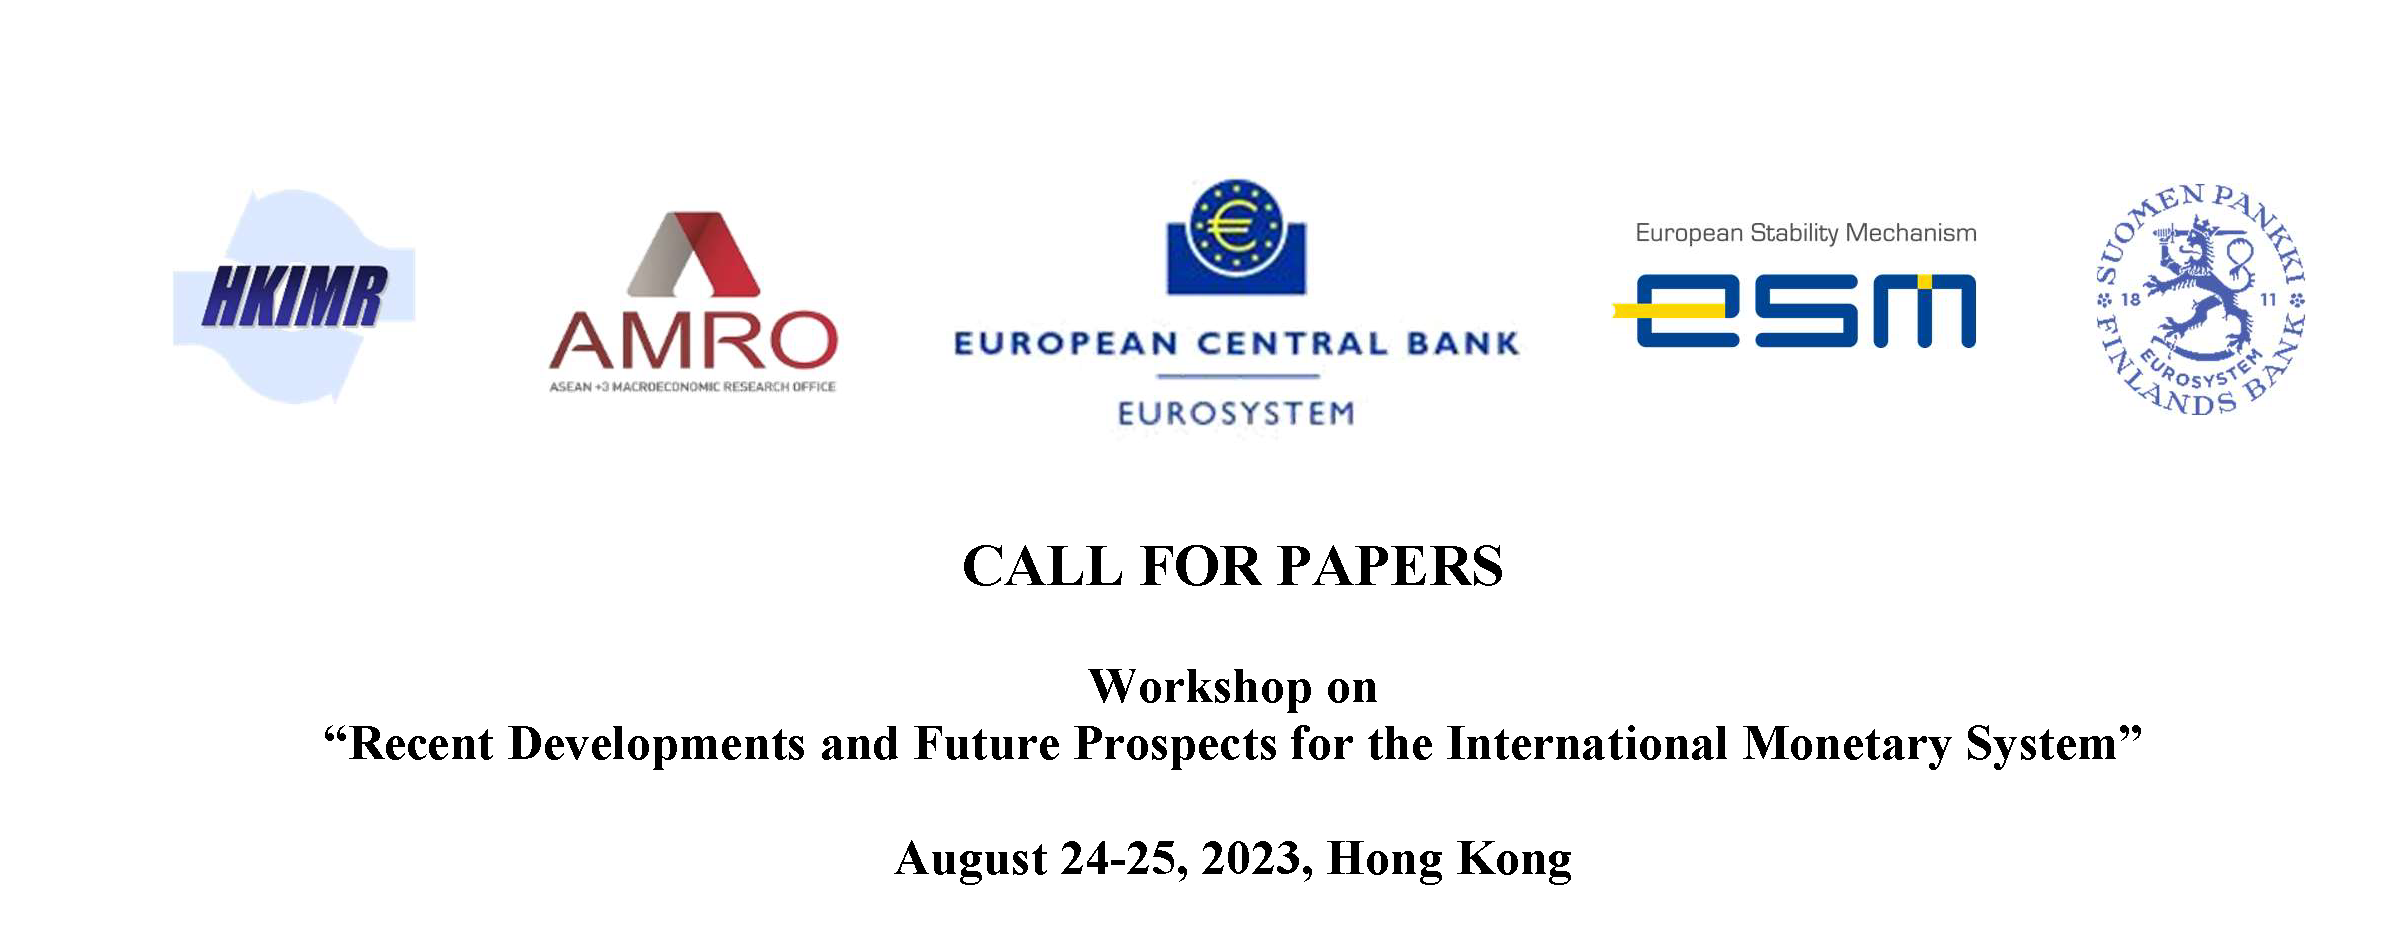 HKIMR Joint Workshop 24-25 August 2023_Call for Papers